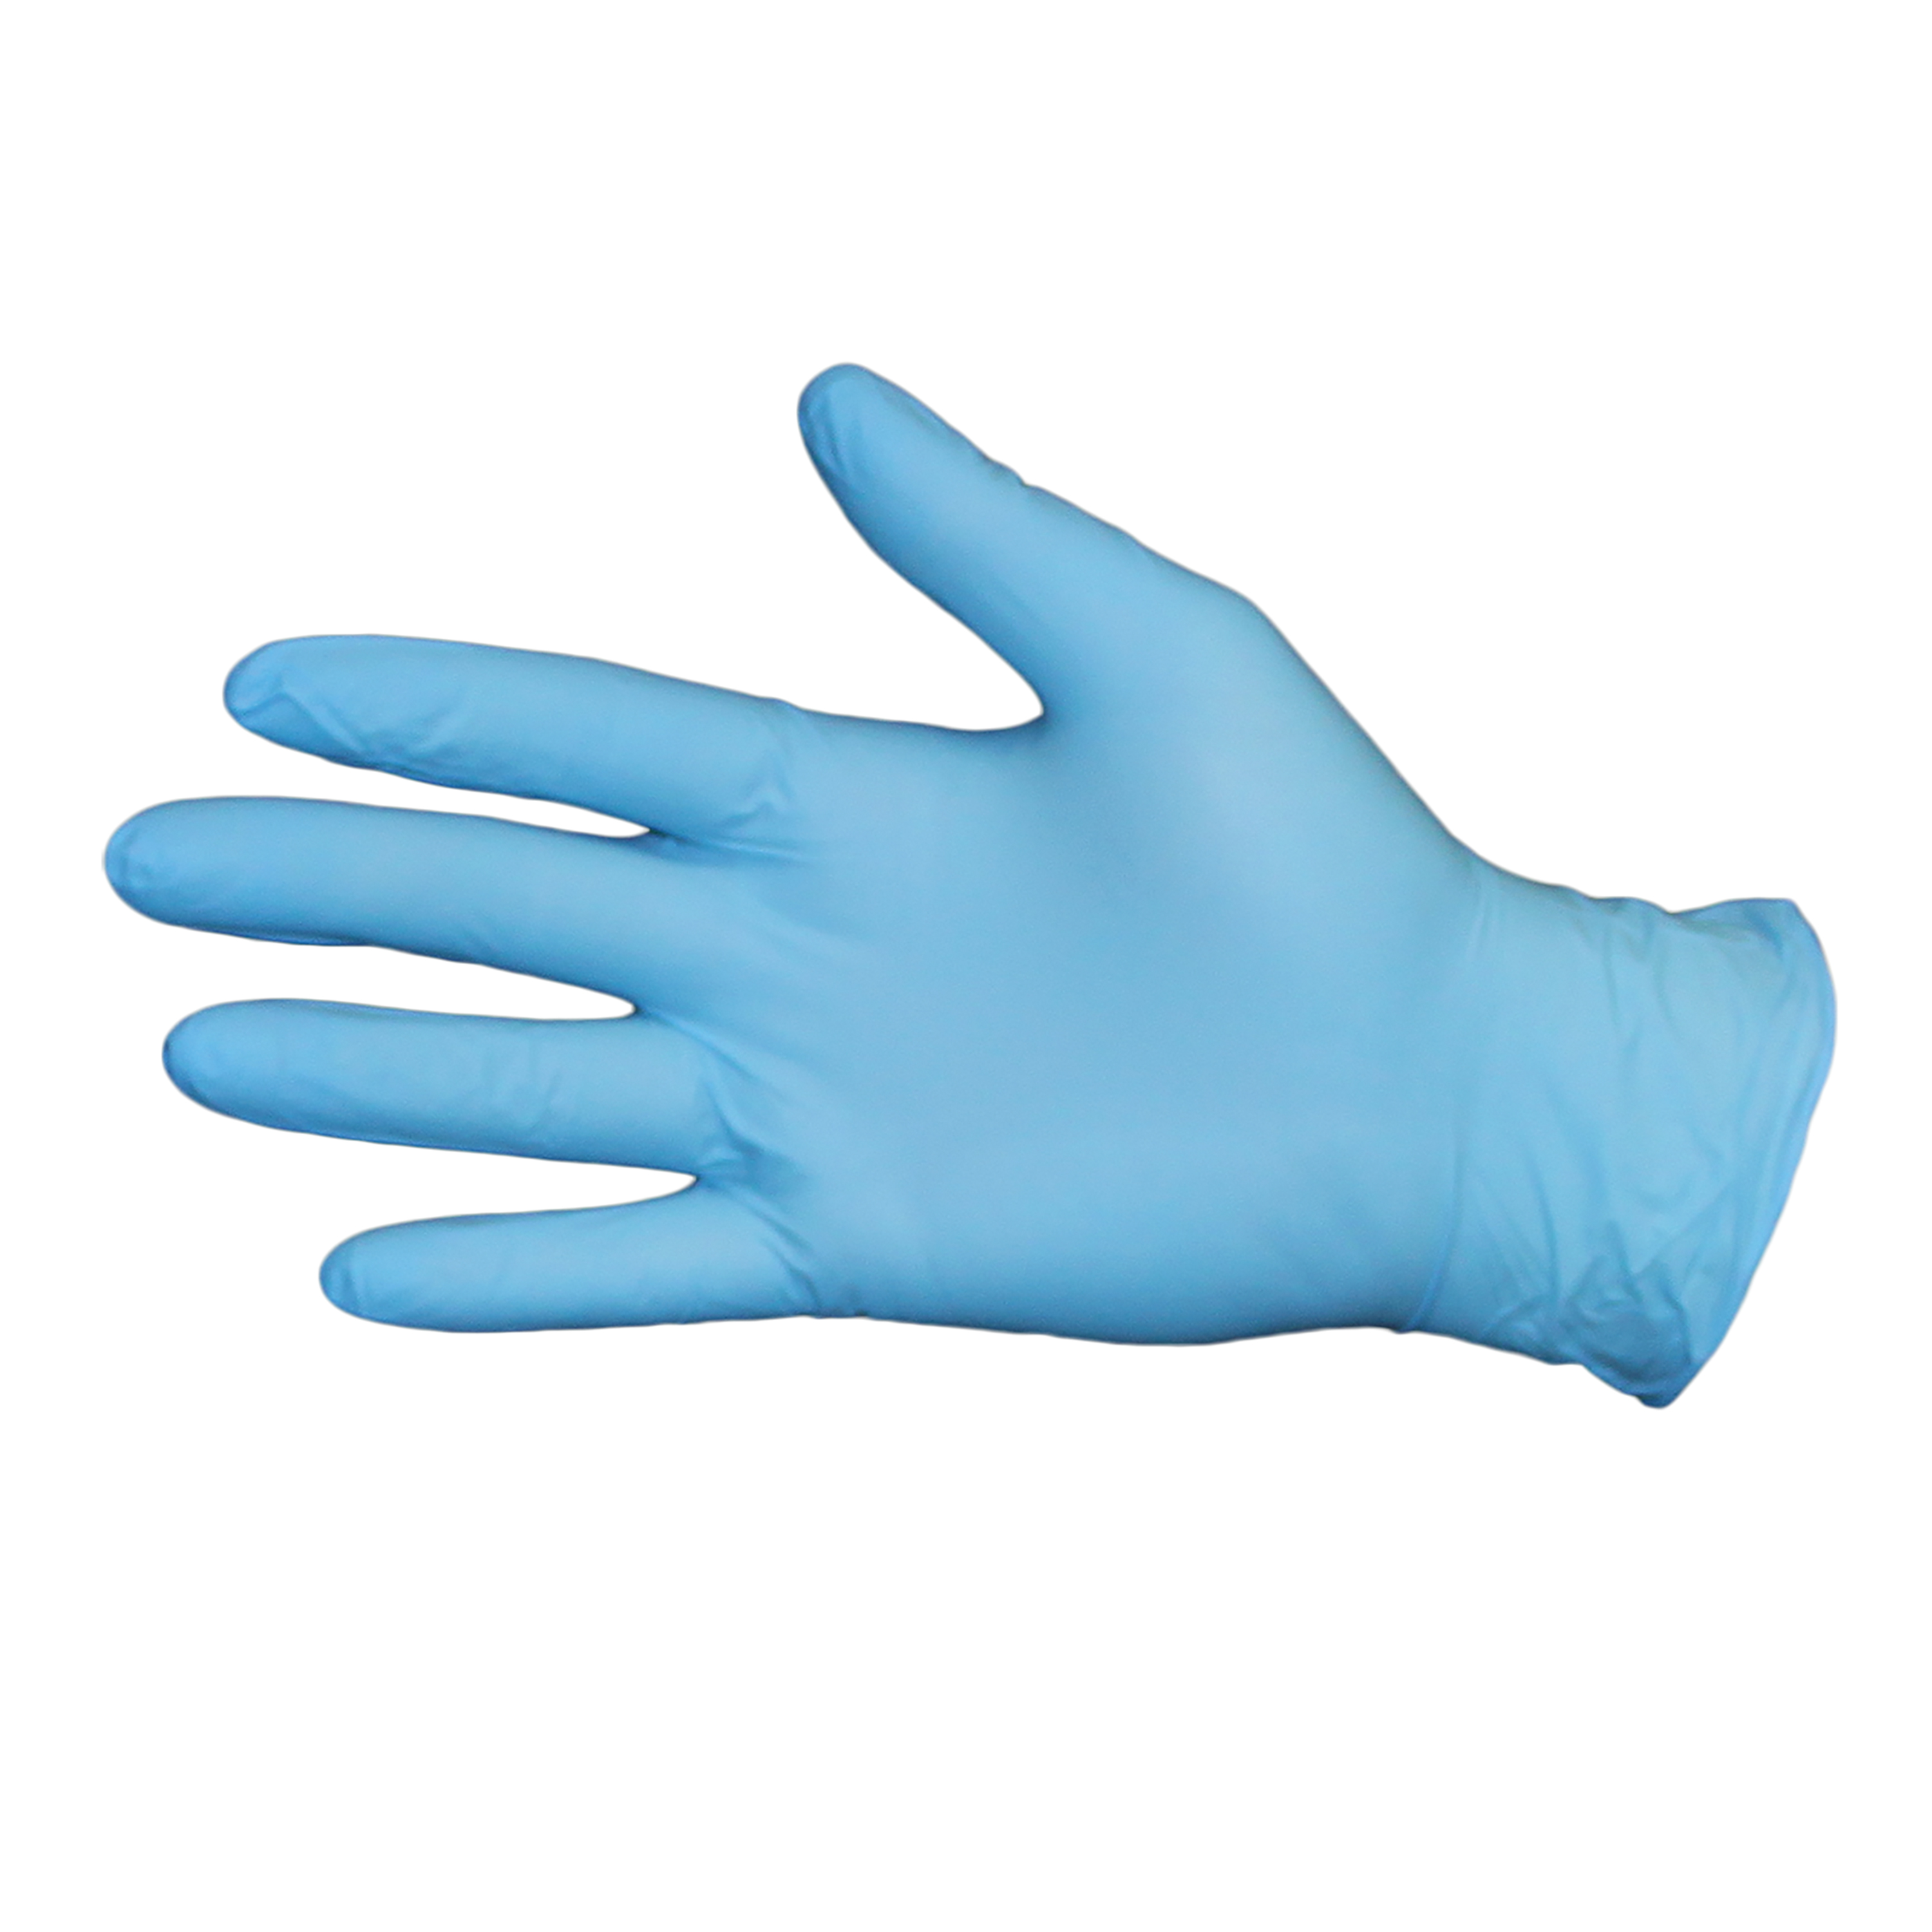 Gloves Blue Nitrile Powder Free Large 10/100 - Sold by EA